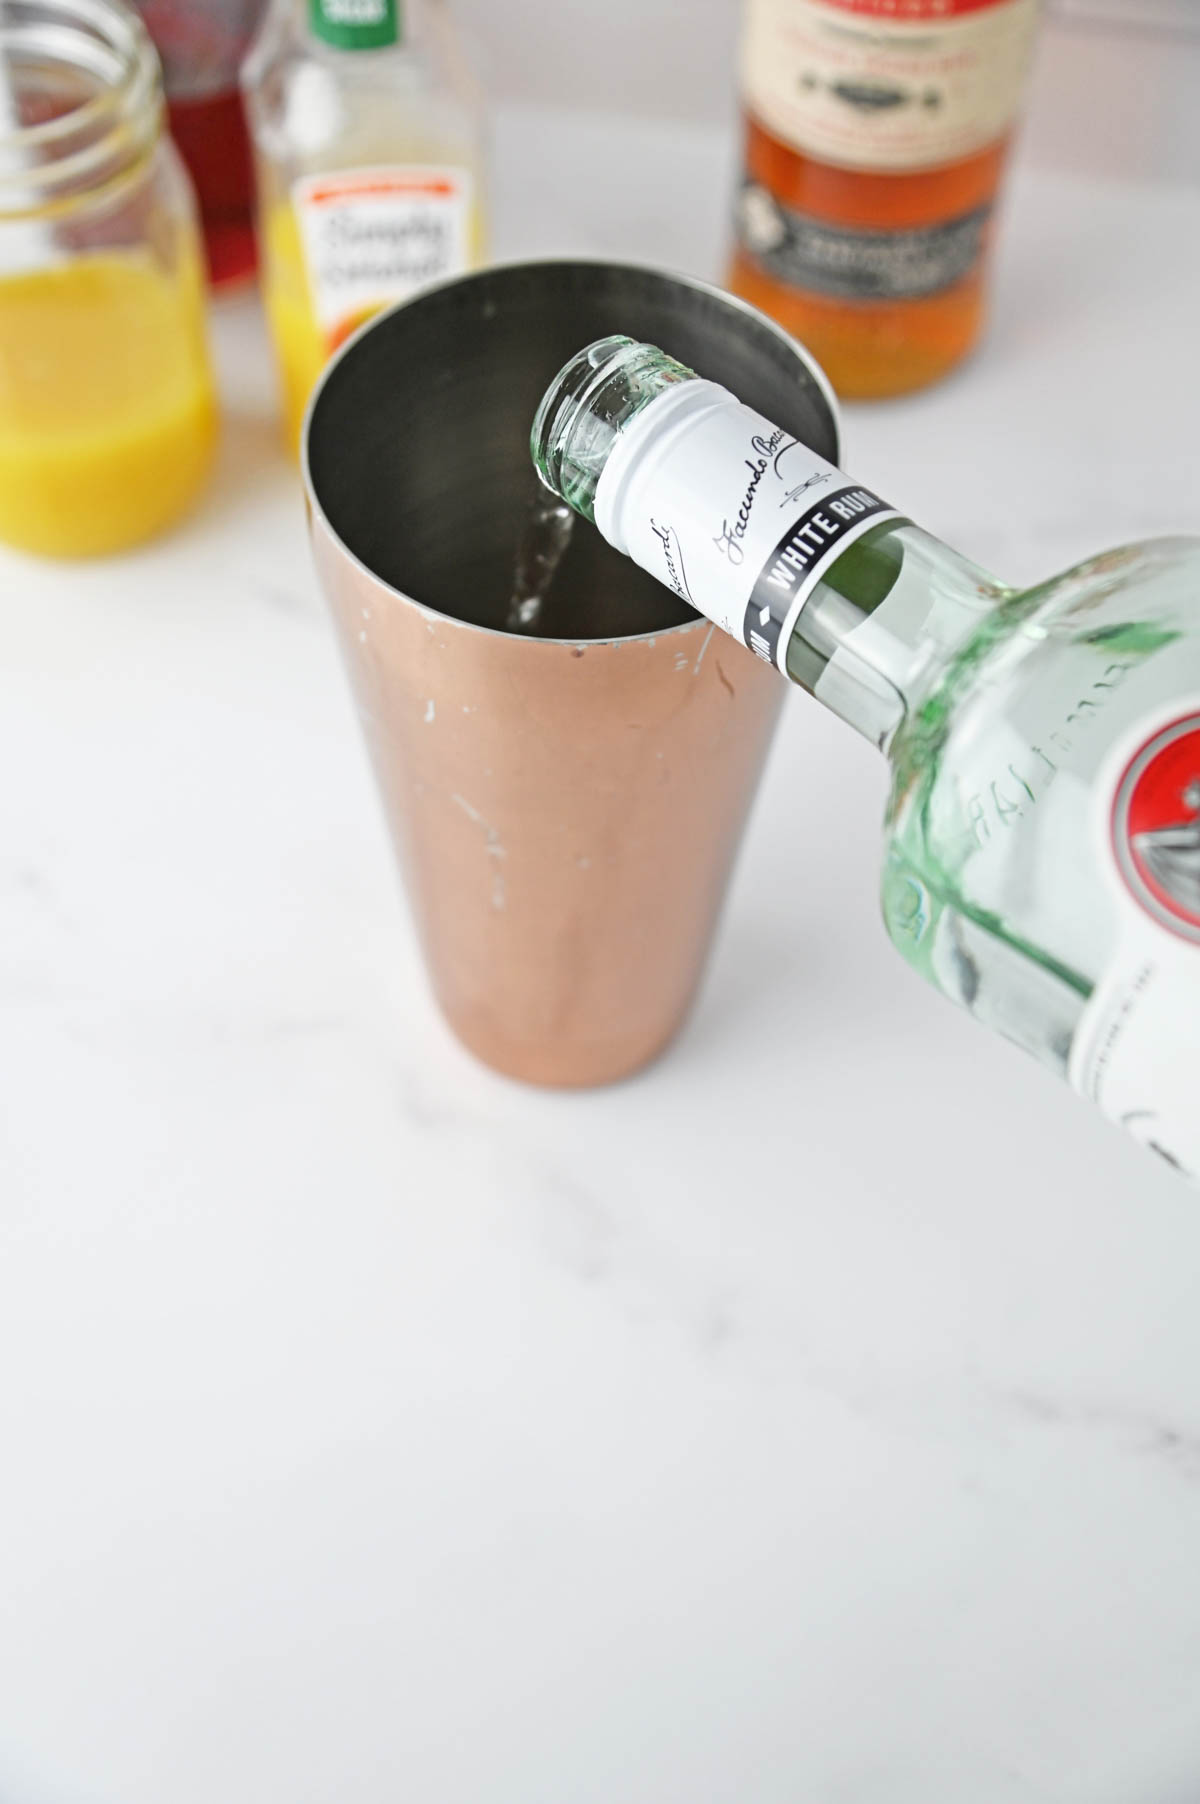 Adding rum to cocktail shaker